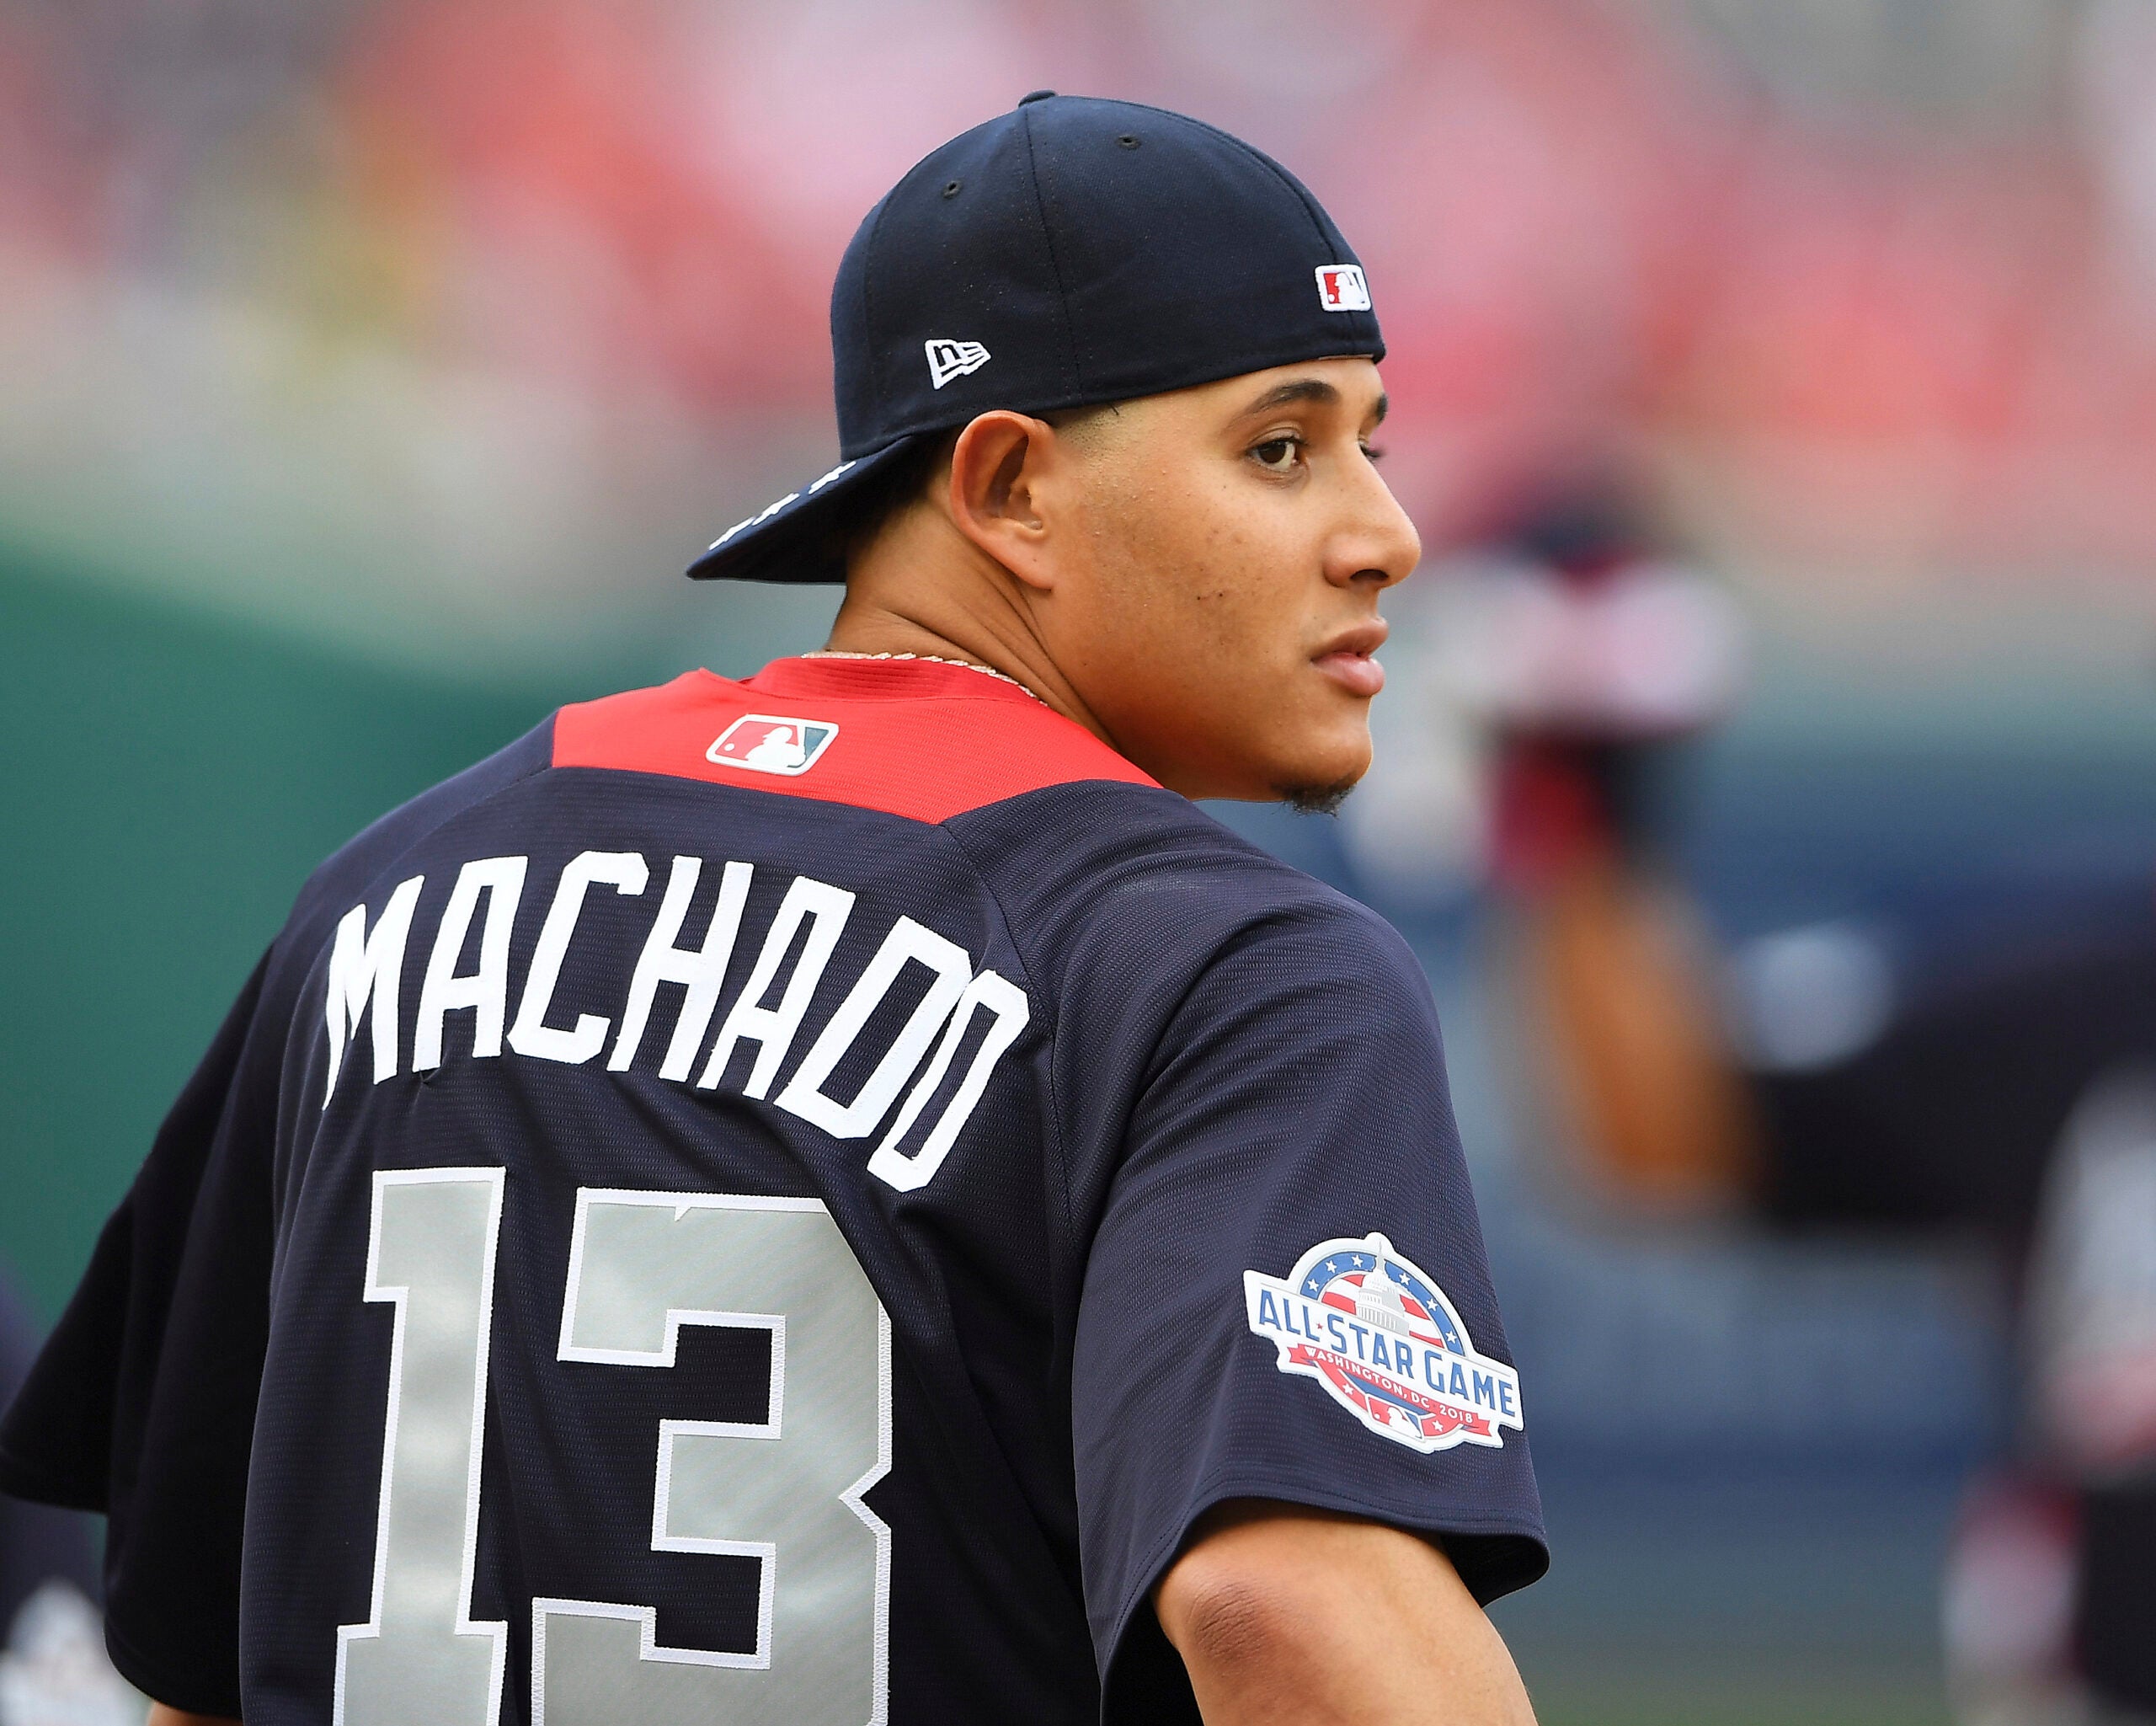 Manny Machado will start for Dodgers on Friday